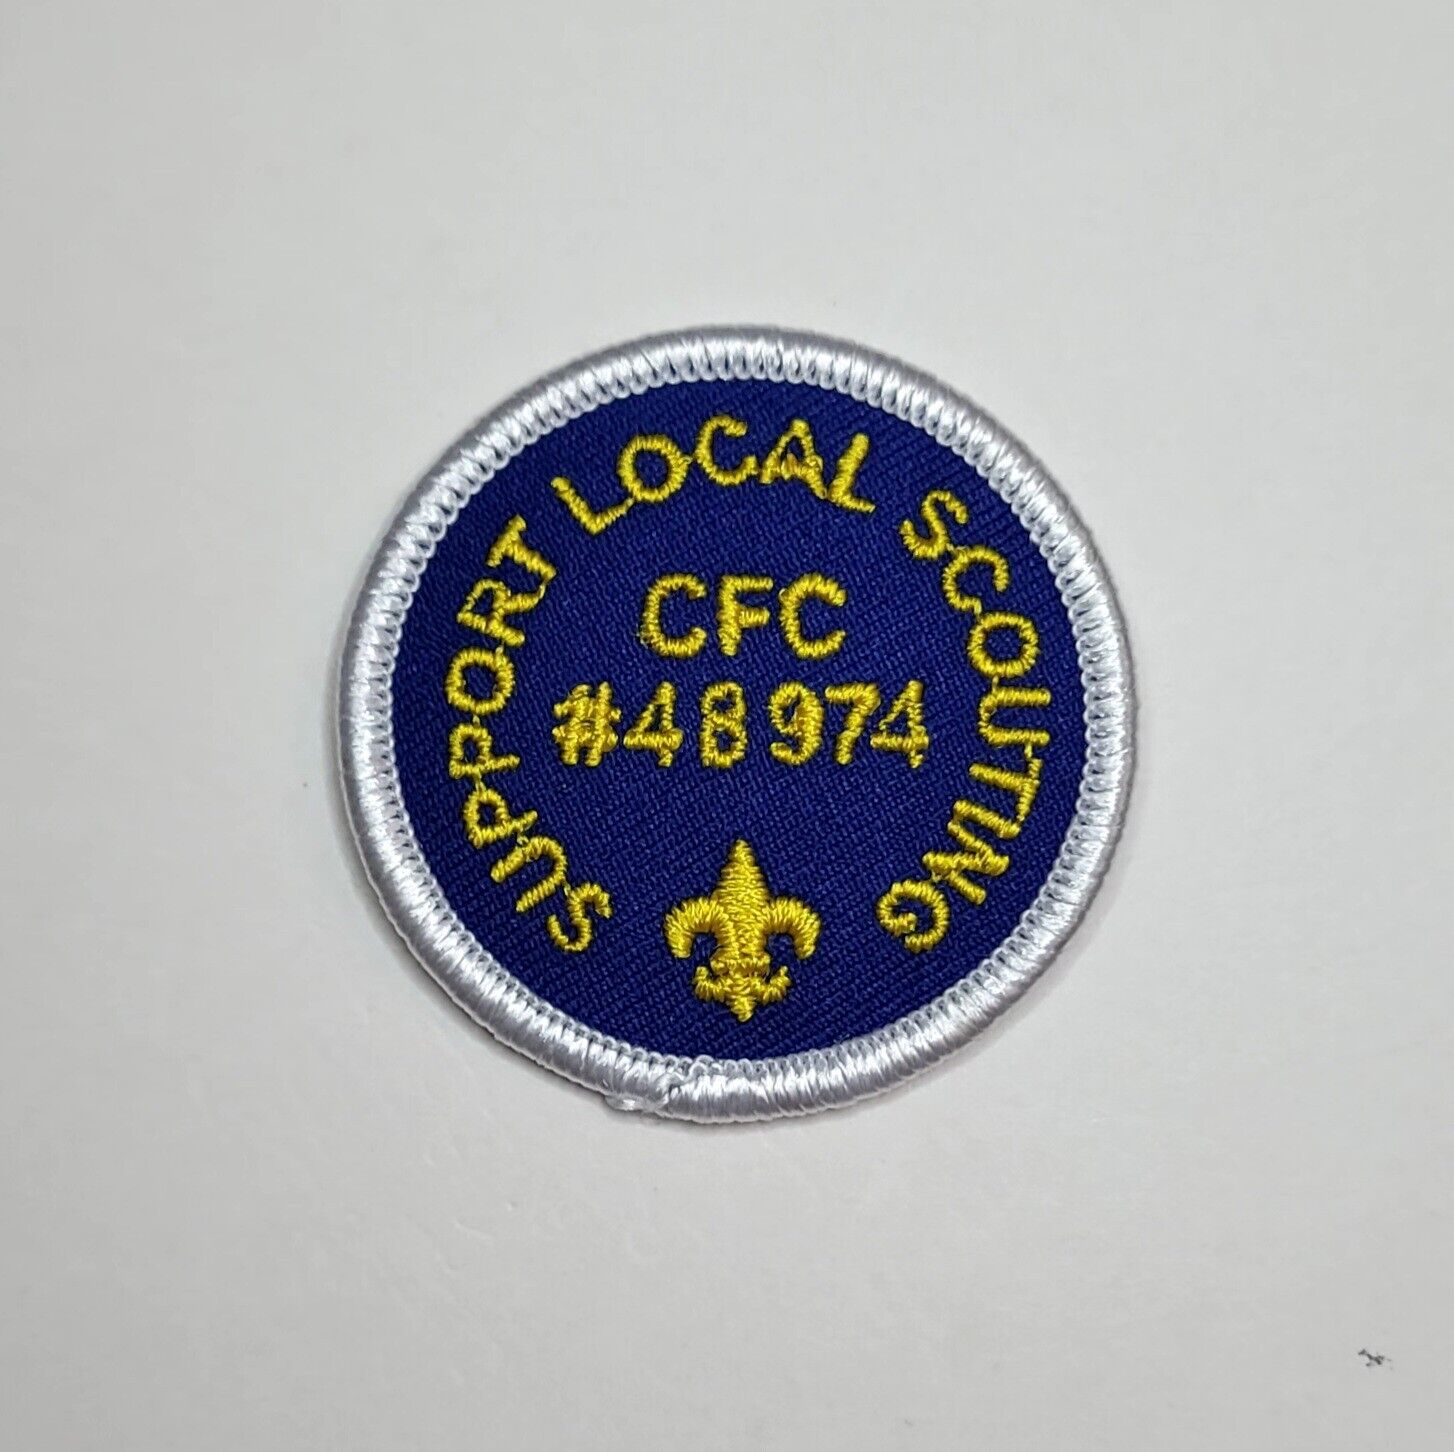 Support Local Scouting CFC #48974 Scouts BSA OP025.